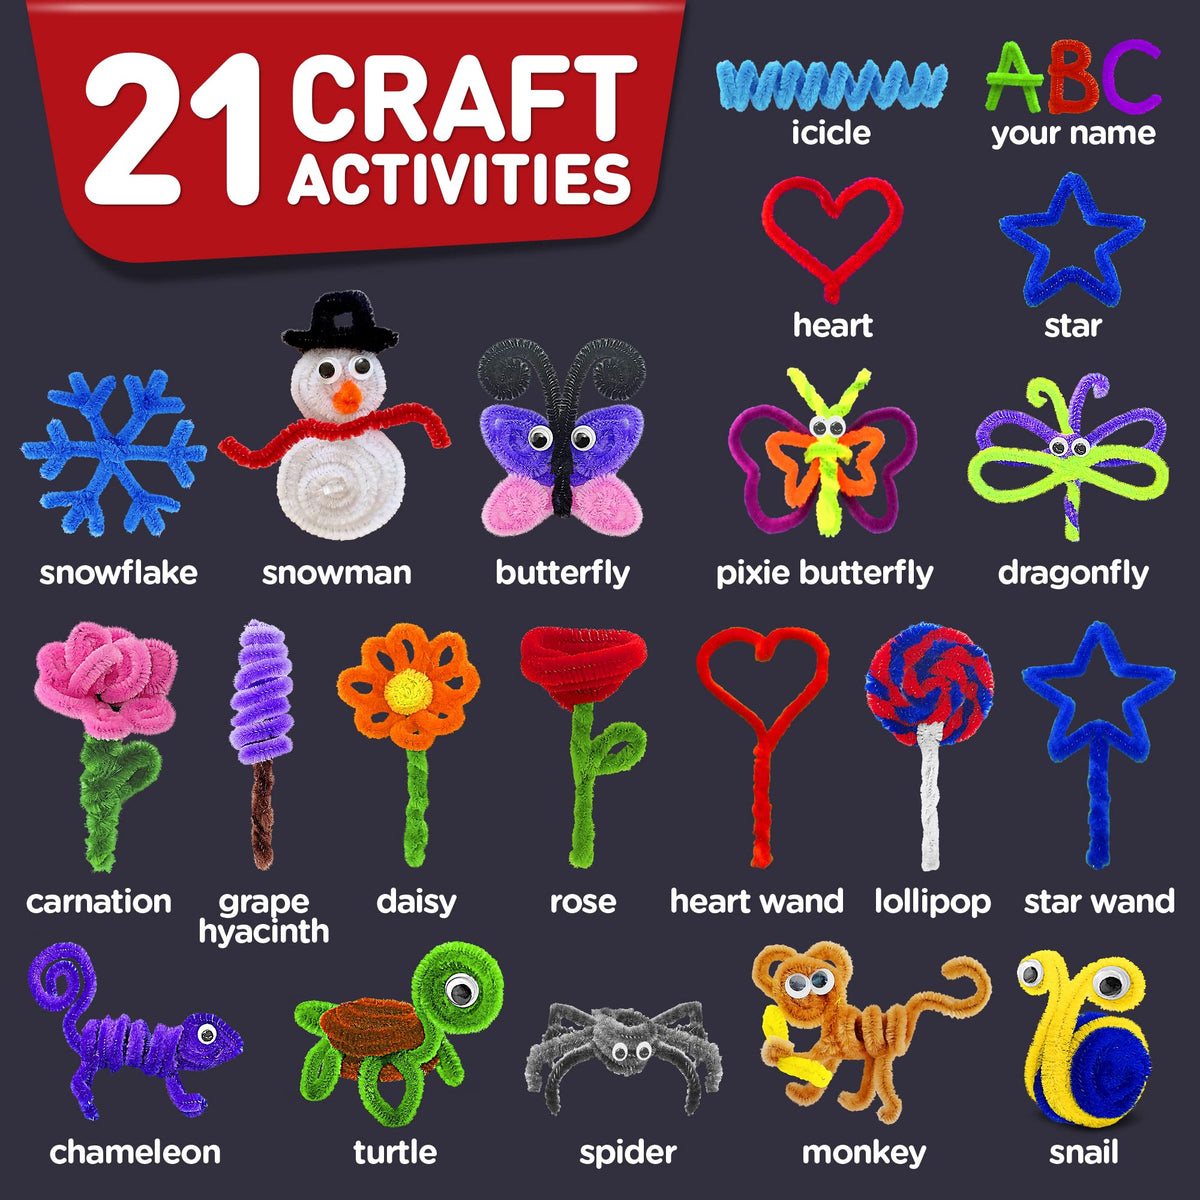 Arts and Crafts for Kids Ages 8-12, Create Your Own Plush Toys, Kit  Includes All Supplies and Instructions, Best Craft Project for Girls & Boys  Ages 7,8,9,10,11,12, Great Gift! 